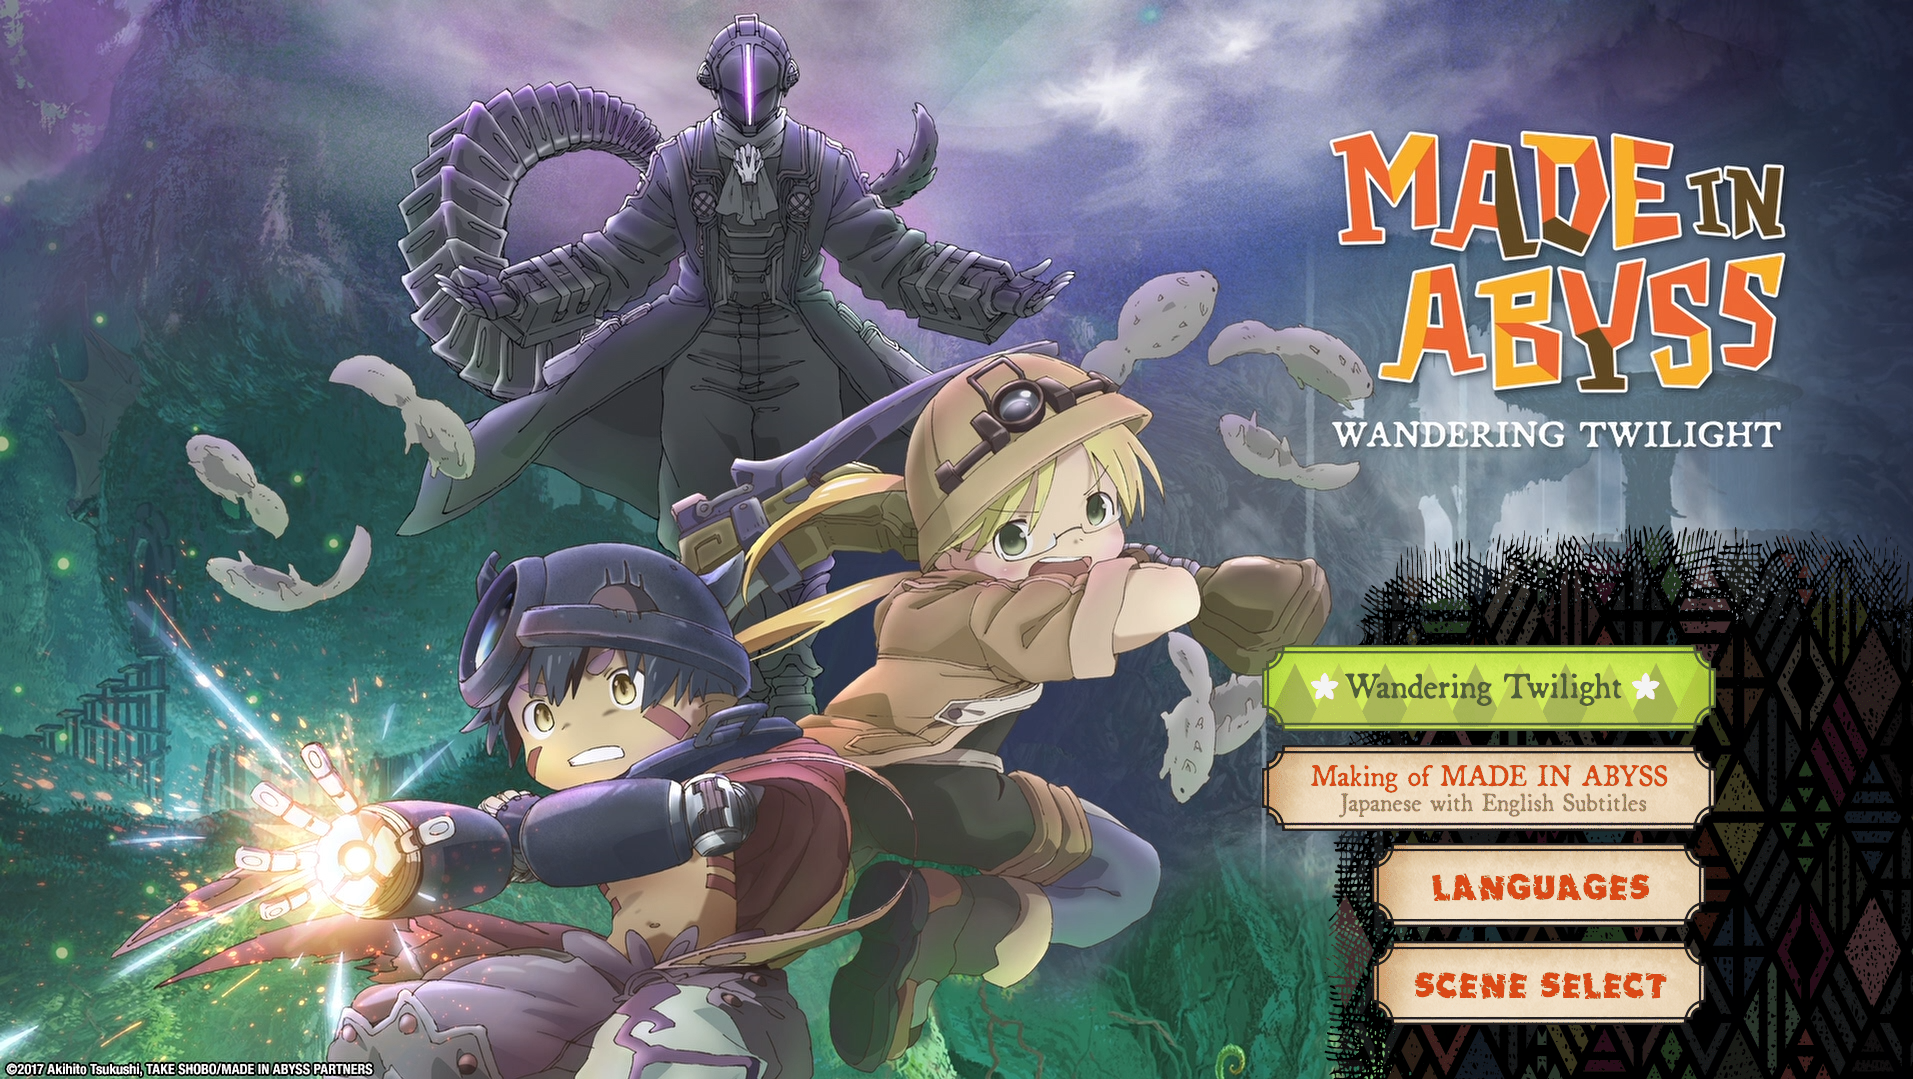 Made in Abyss: Crepúsculo errante (2019) 1080p BD50 Latino